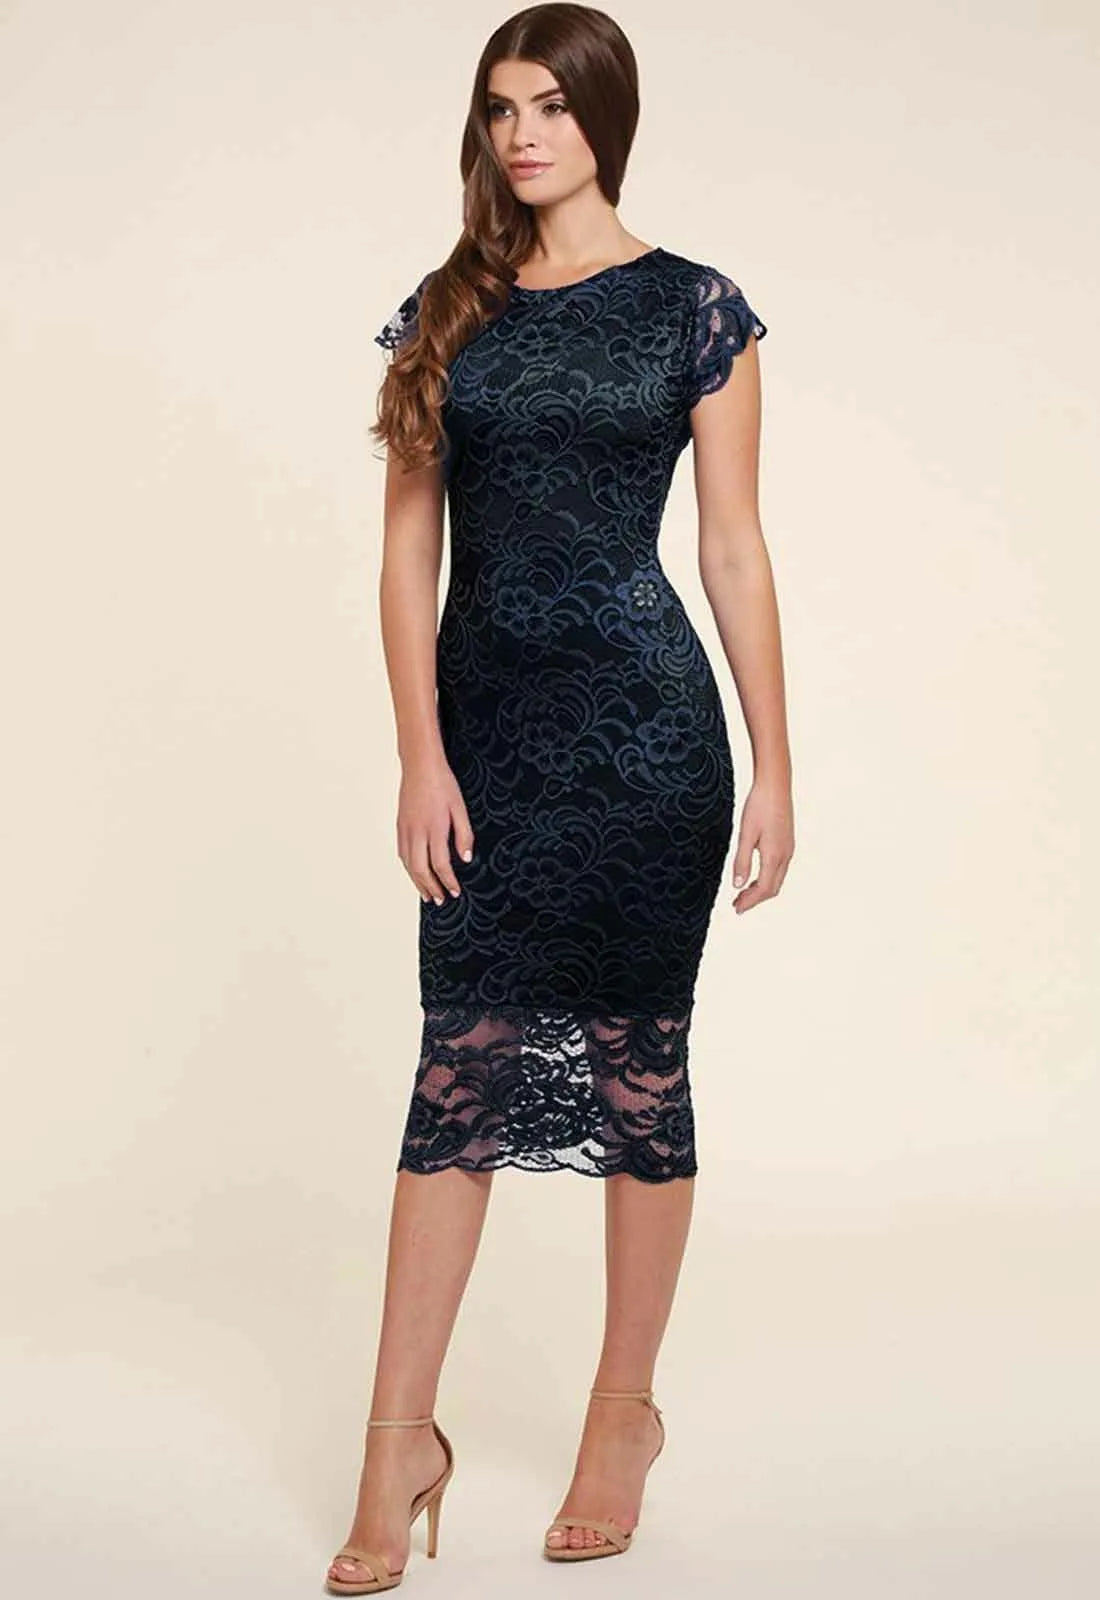 Honor Gold Faye Backless Lace Midi Dress in Navy-19555